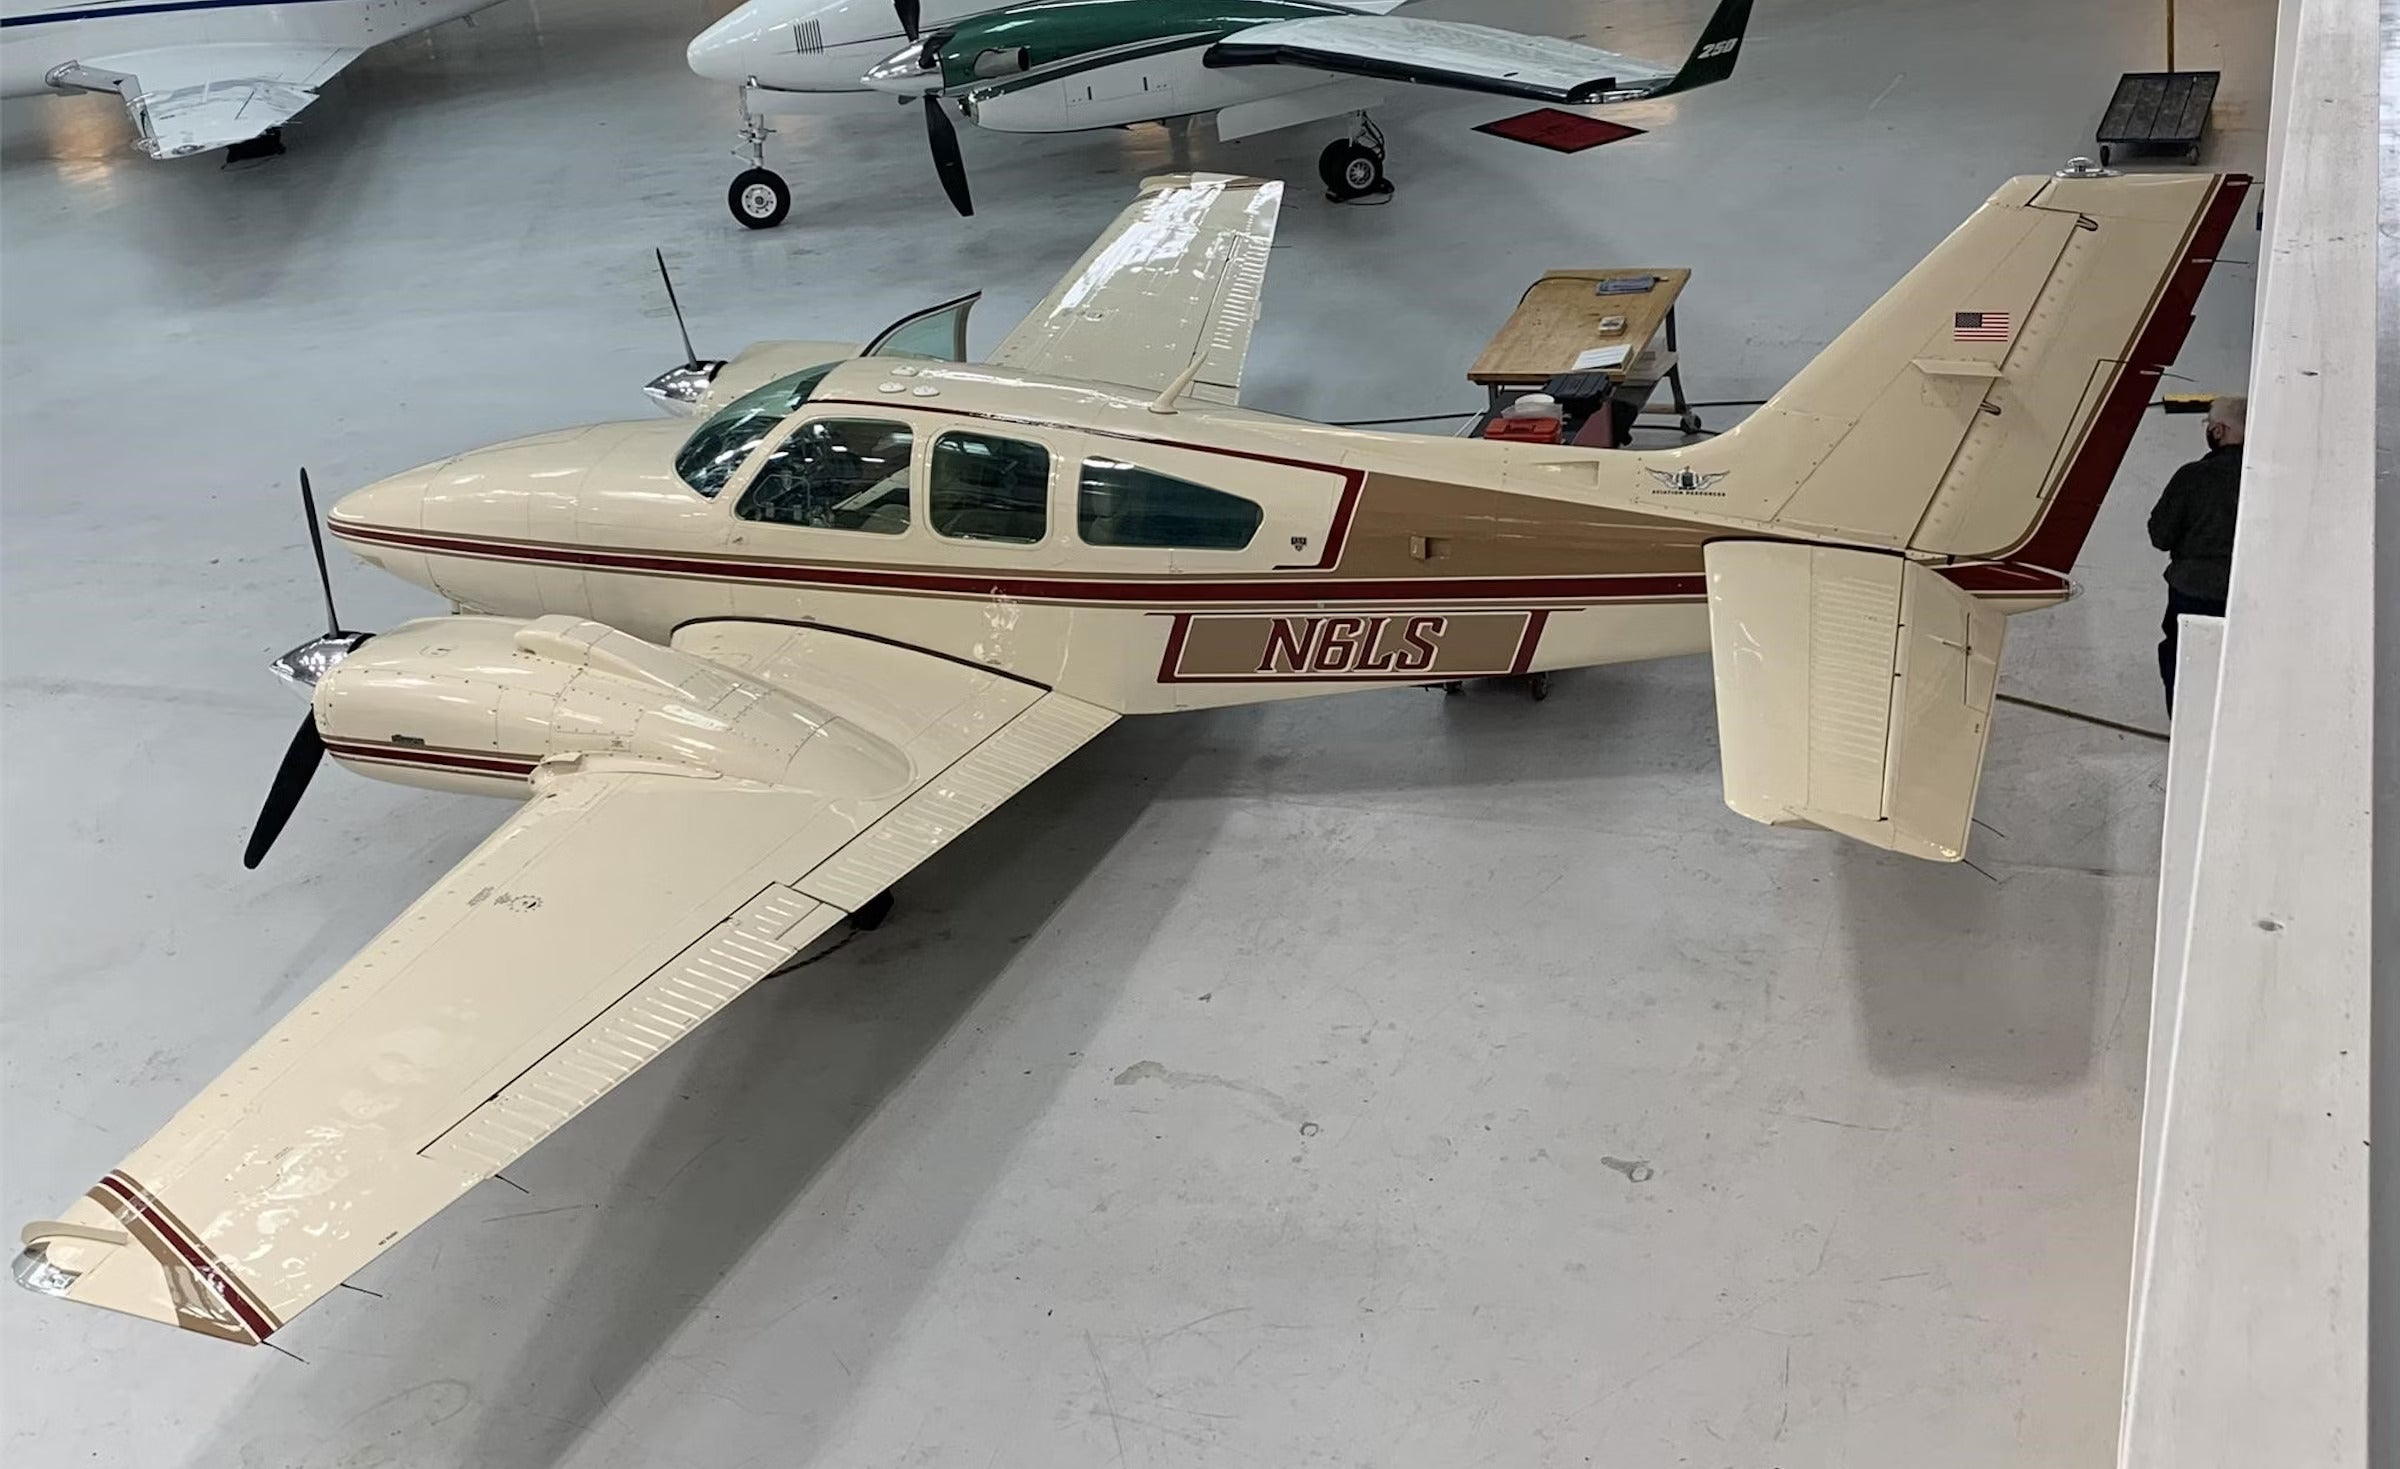 This 1981 Beechcraft Baron E55 Is a Fast-Climbing, Load-Hauling ‘AircraftForSale’ Top Pick